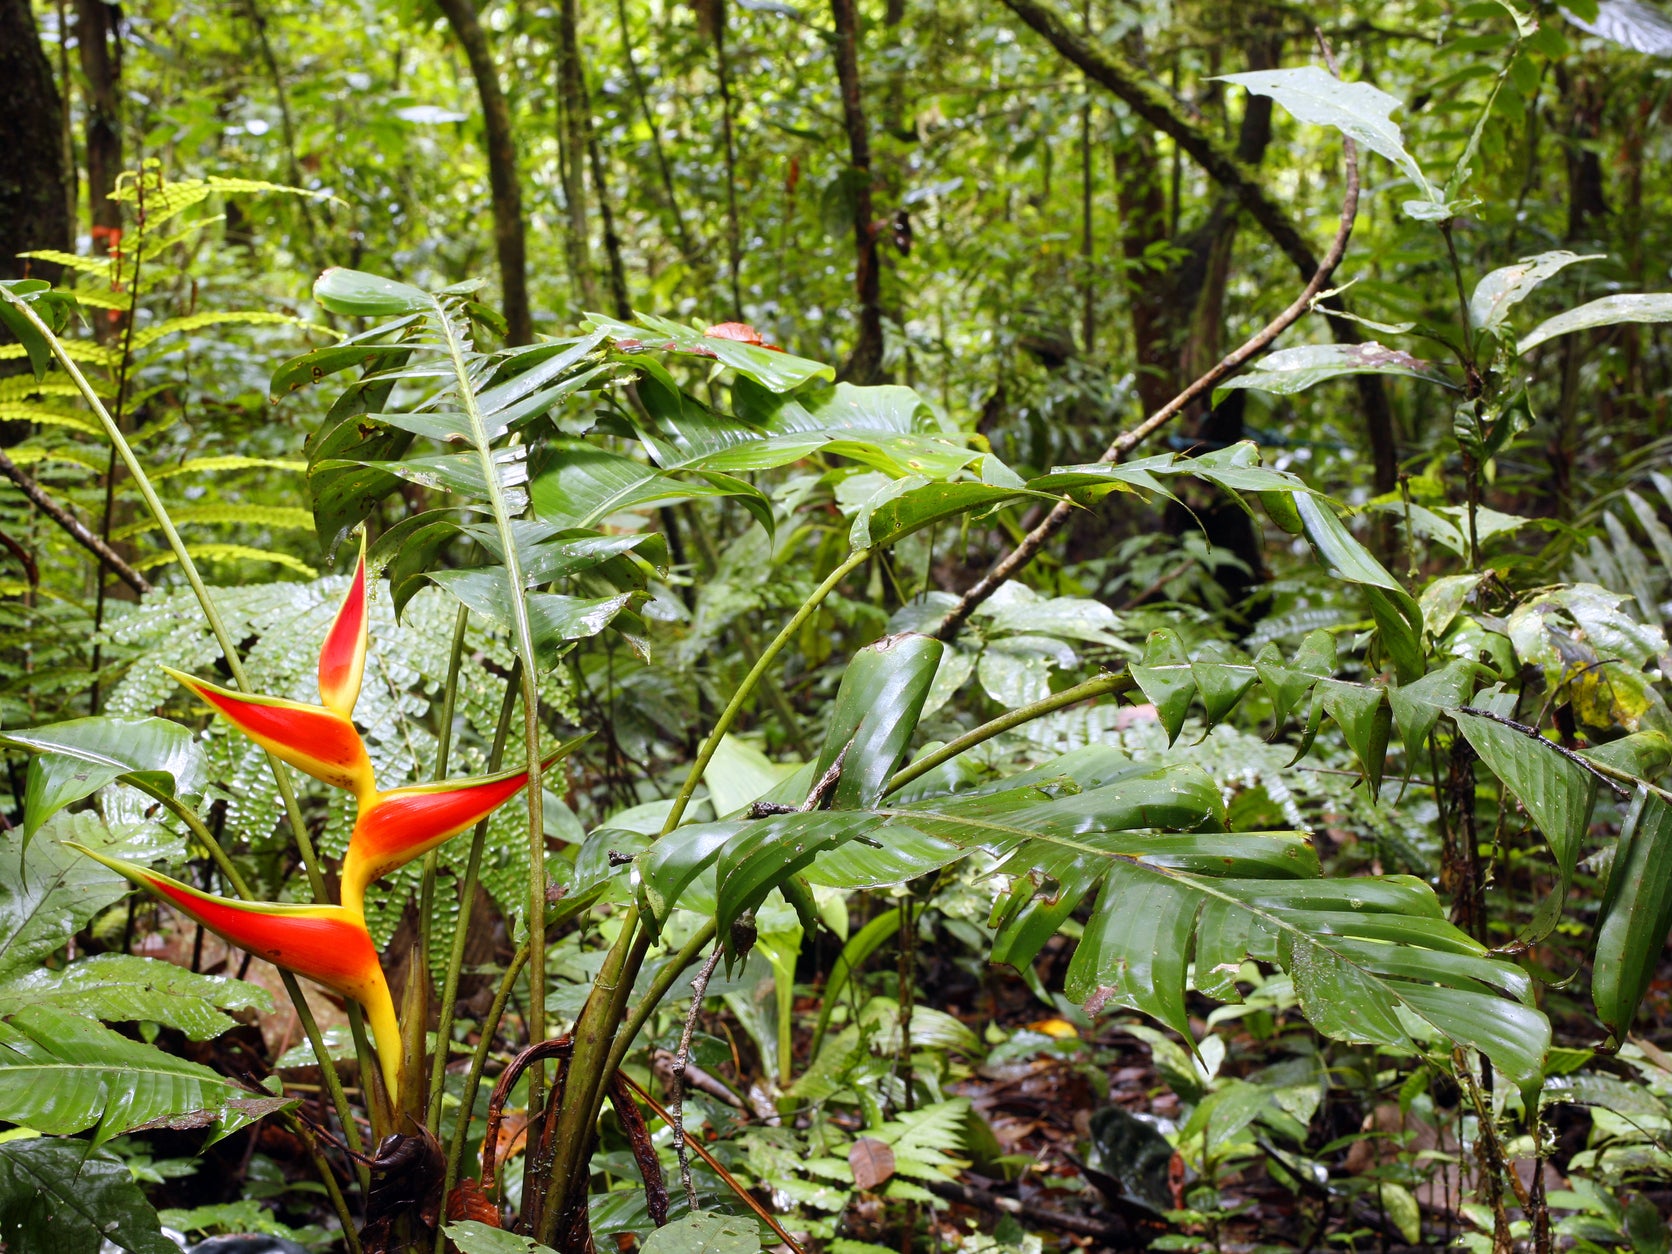 The Ecuadorian Amazon. By 2070 many tropical plants will be at high risk due to rising temperatures